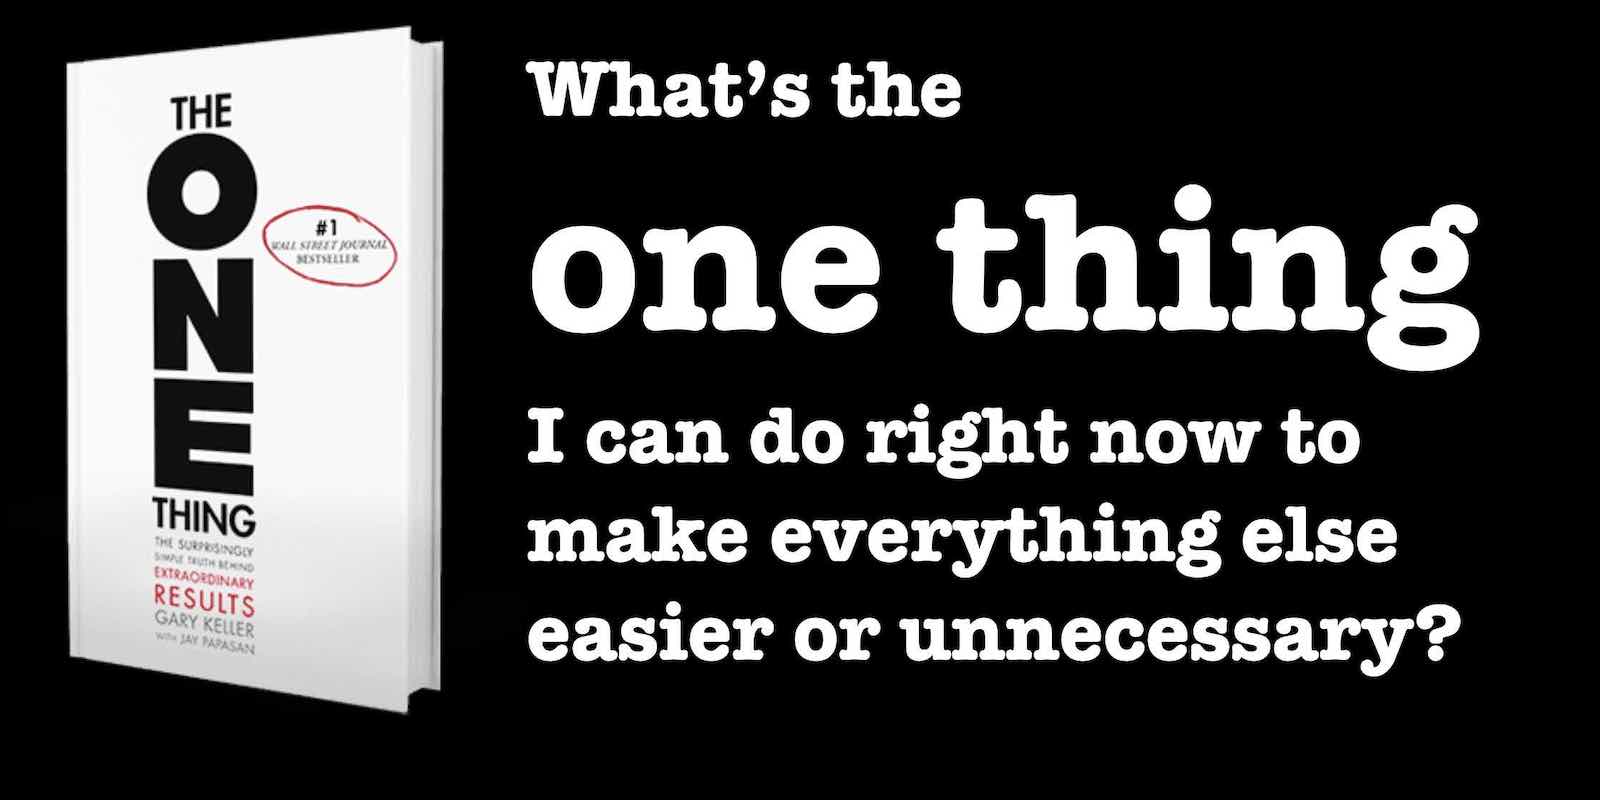 Focusing Question: What's the one thing I can do right now to make everything else easier or unnecessary? From The One Thing by Gary Keller + Jay Papasan